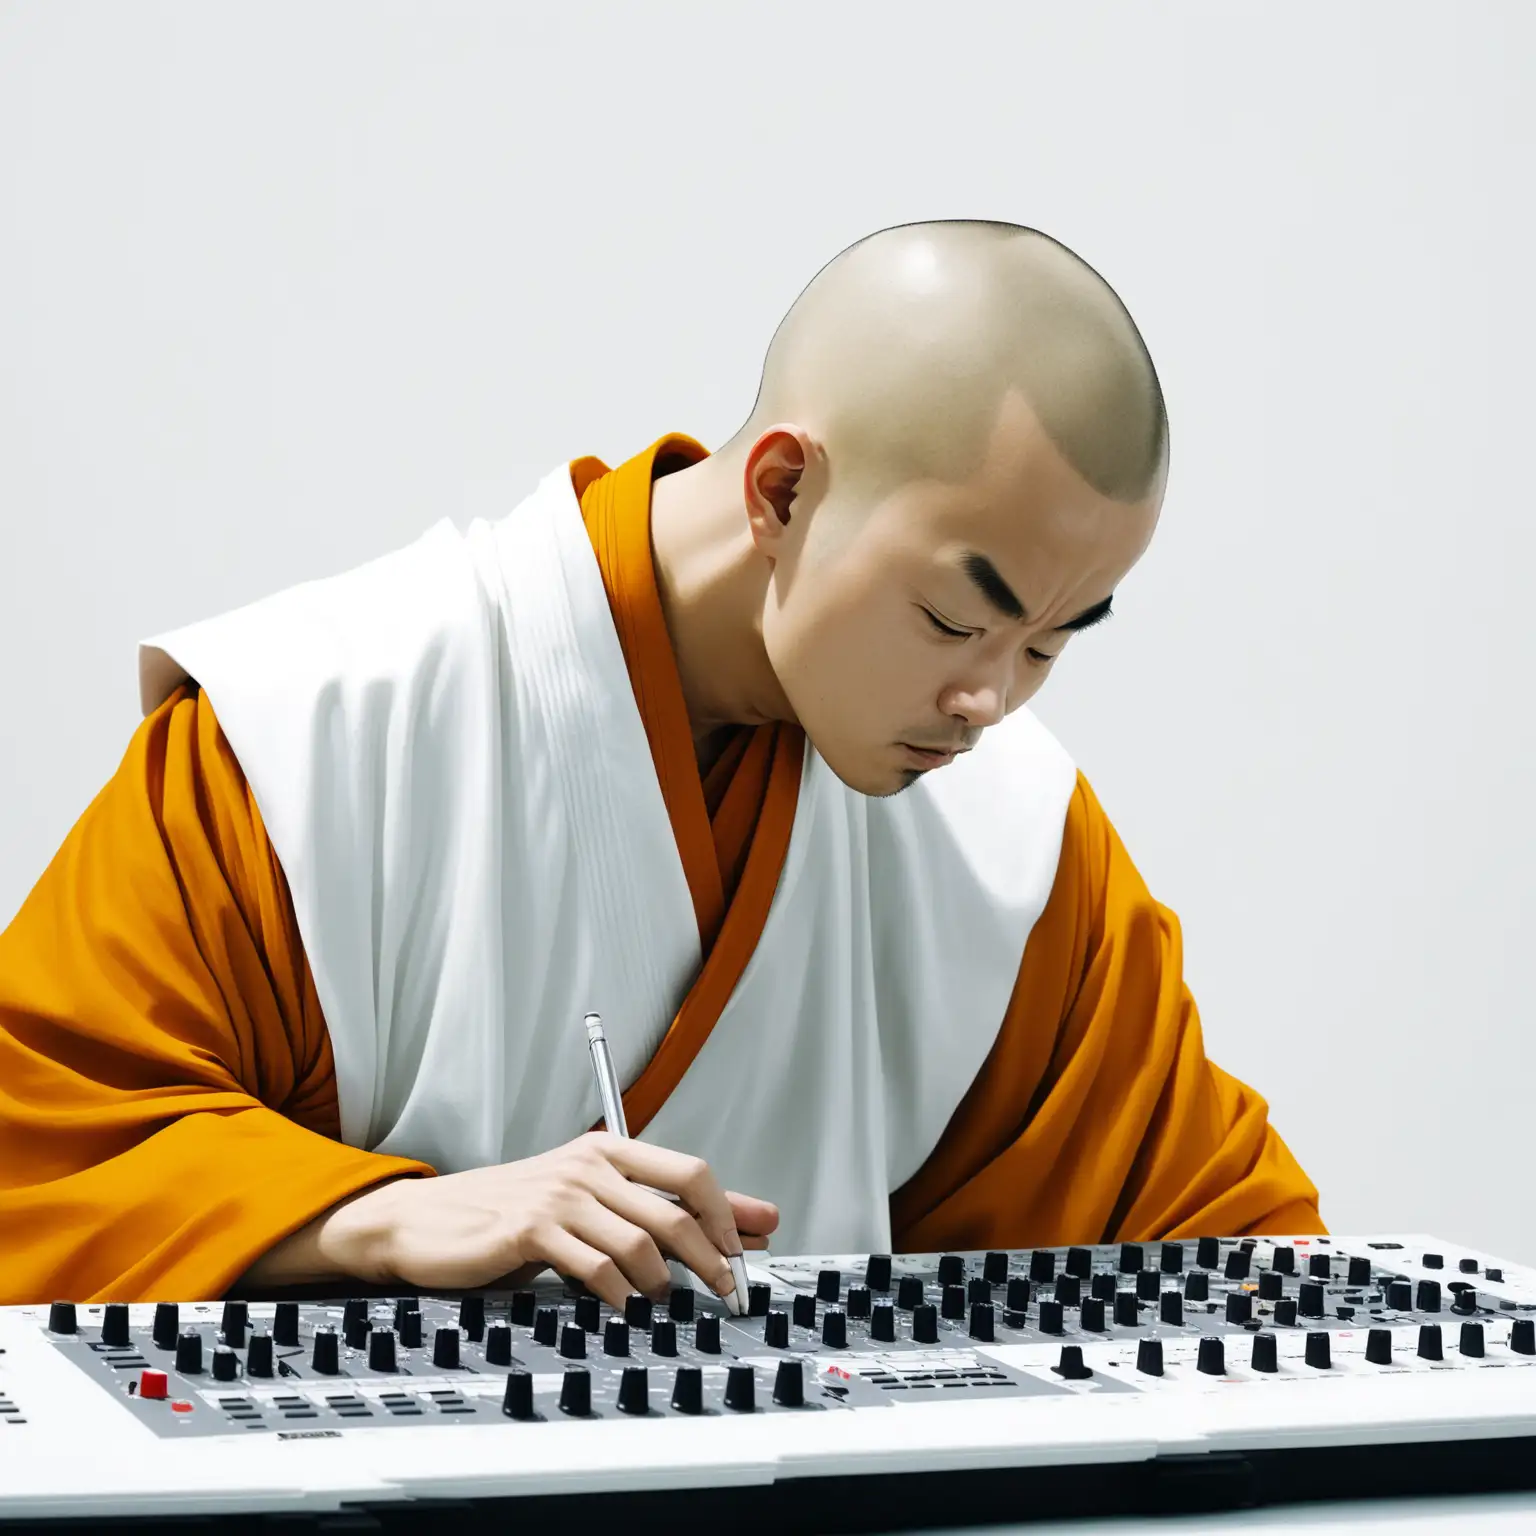 a shaolin monk dressed in pure white earnestly studying over a mixing desk in a plain white room